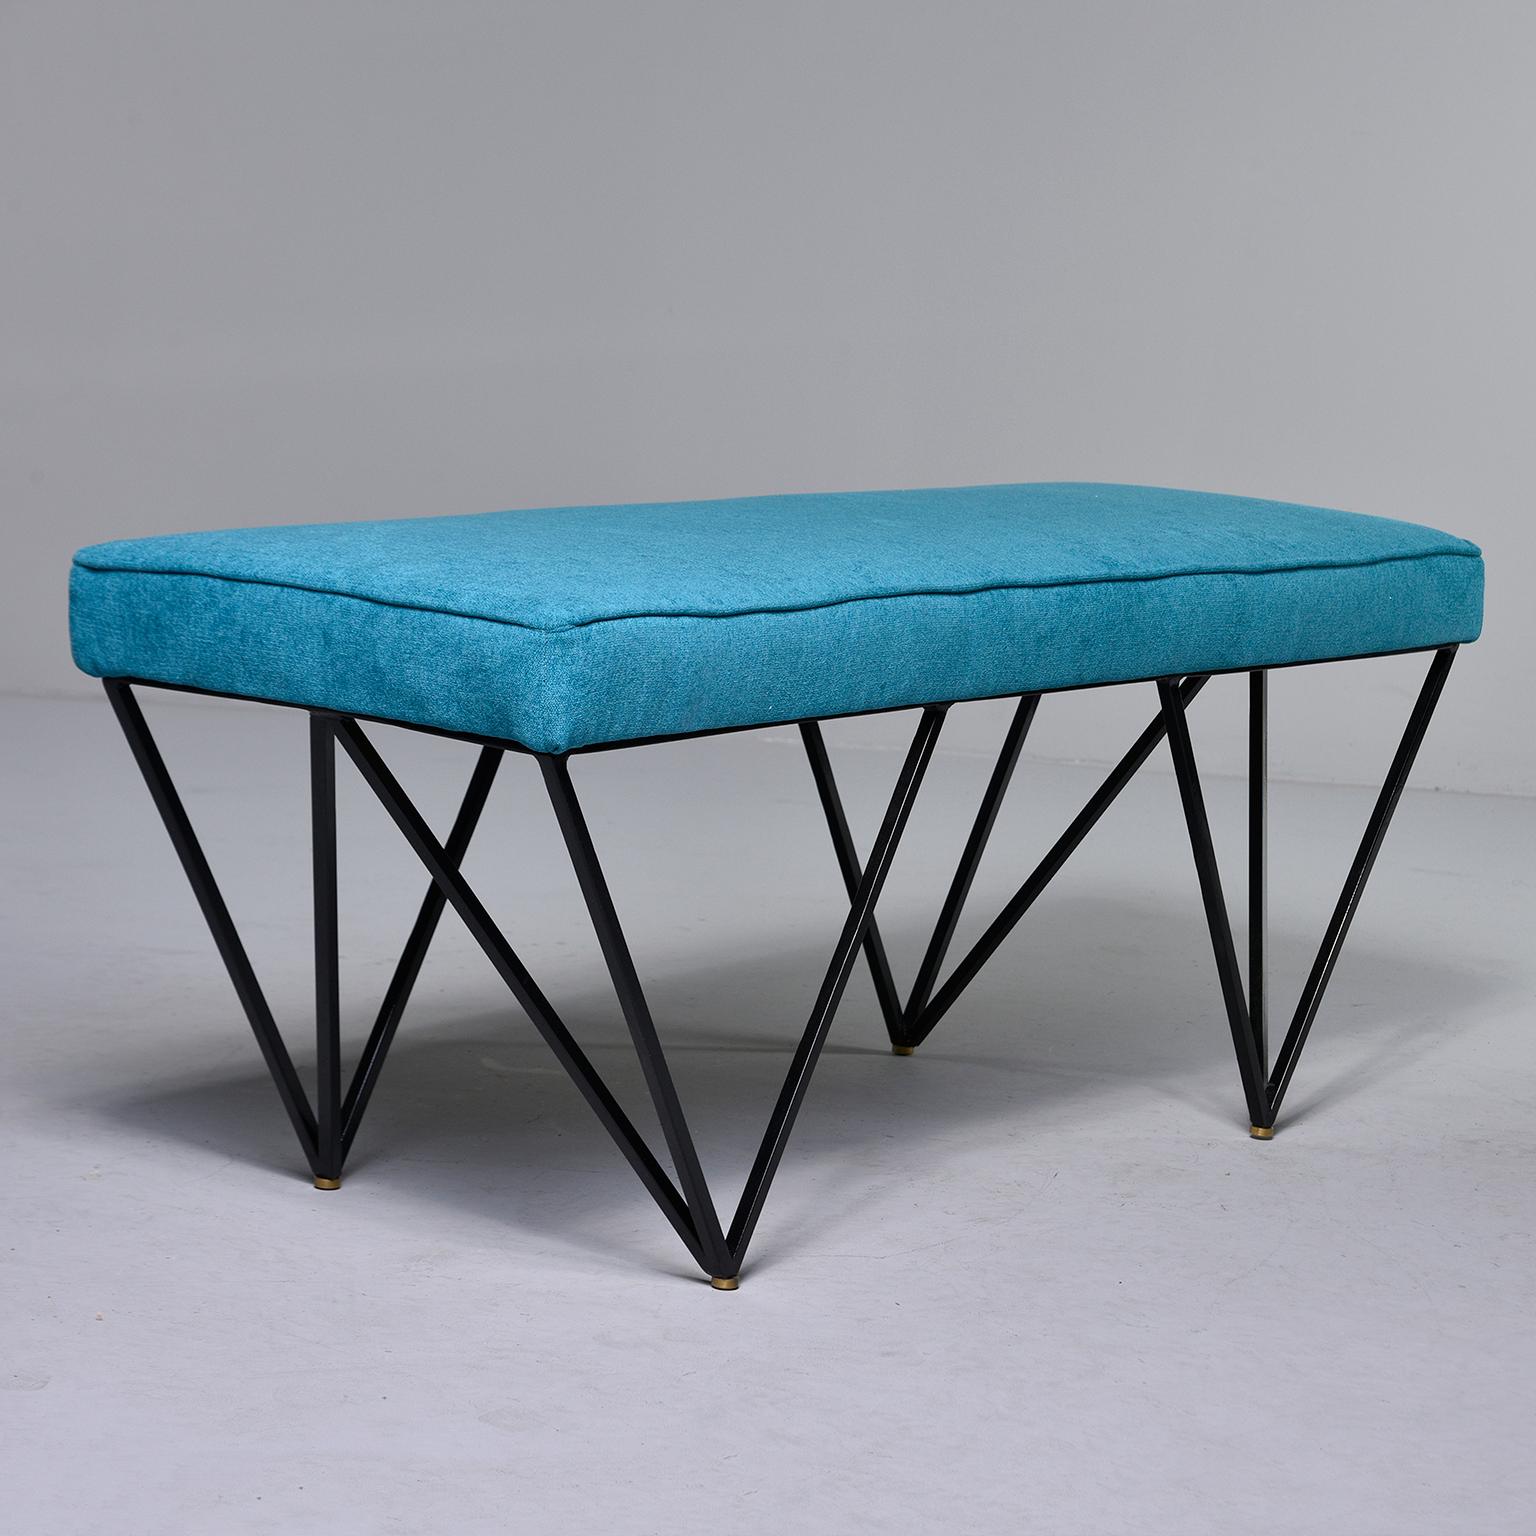 Italian Midcentury Style Bench with Teal Fabric and Black Metal Legs 3